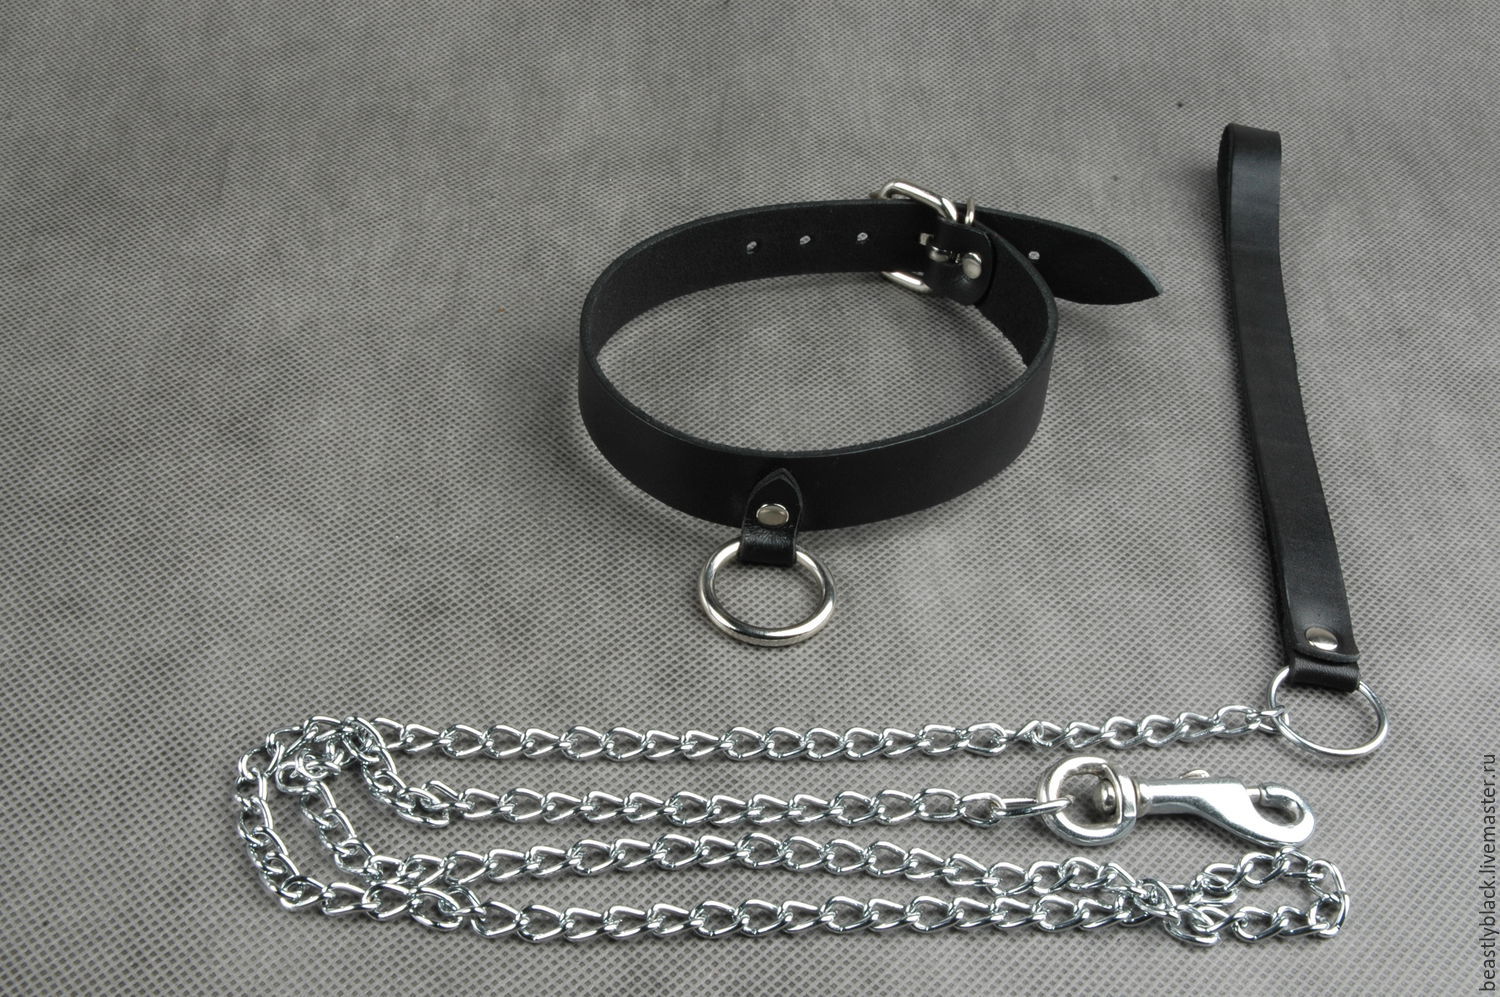 Where can i purchase bdsm slave jewelry